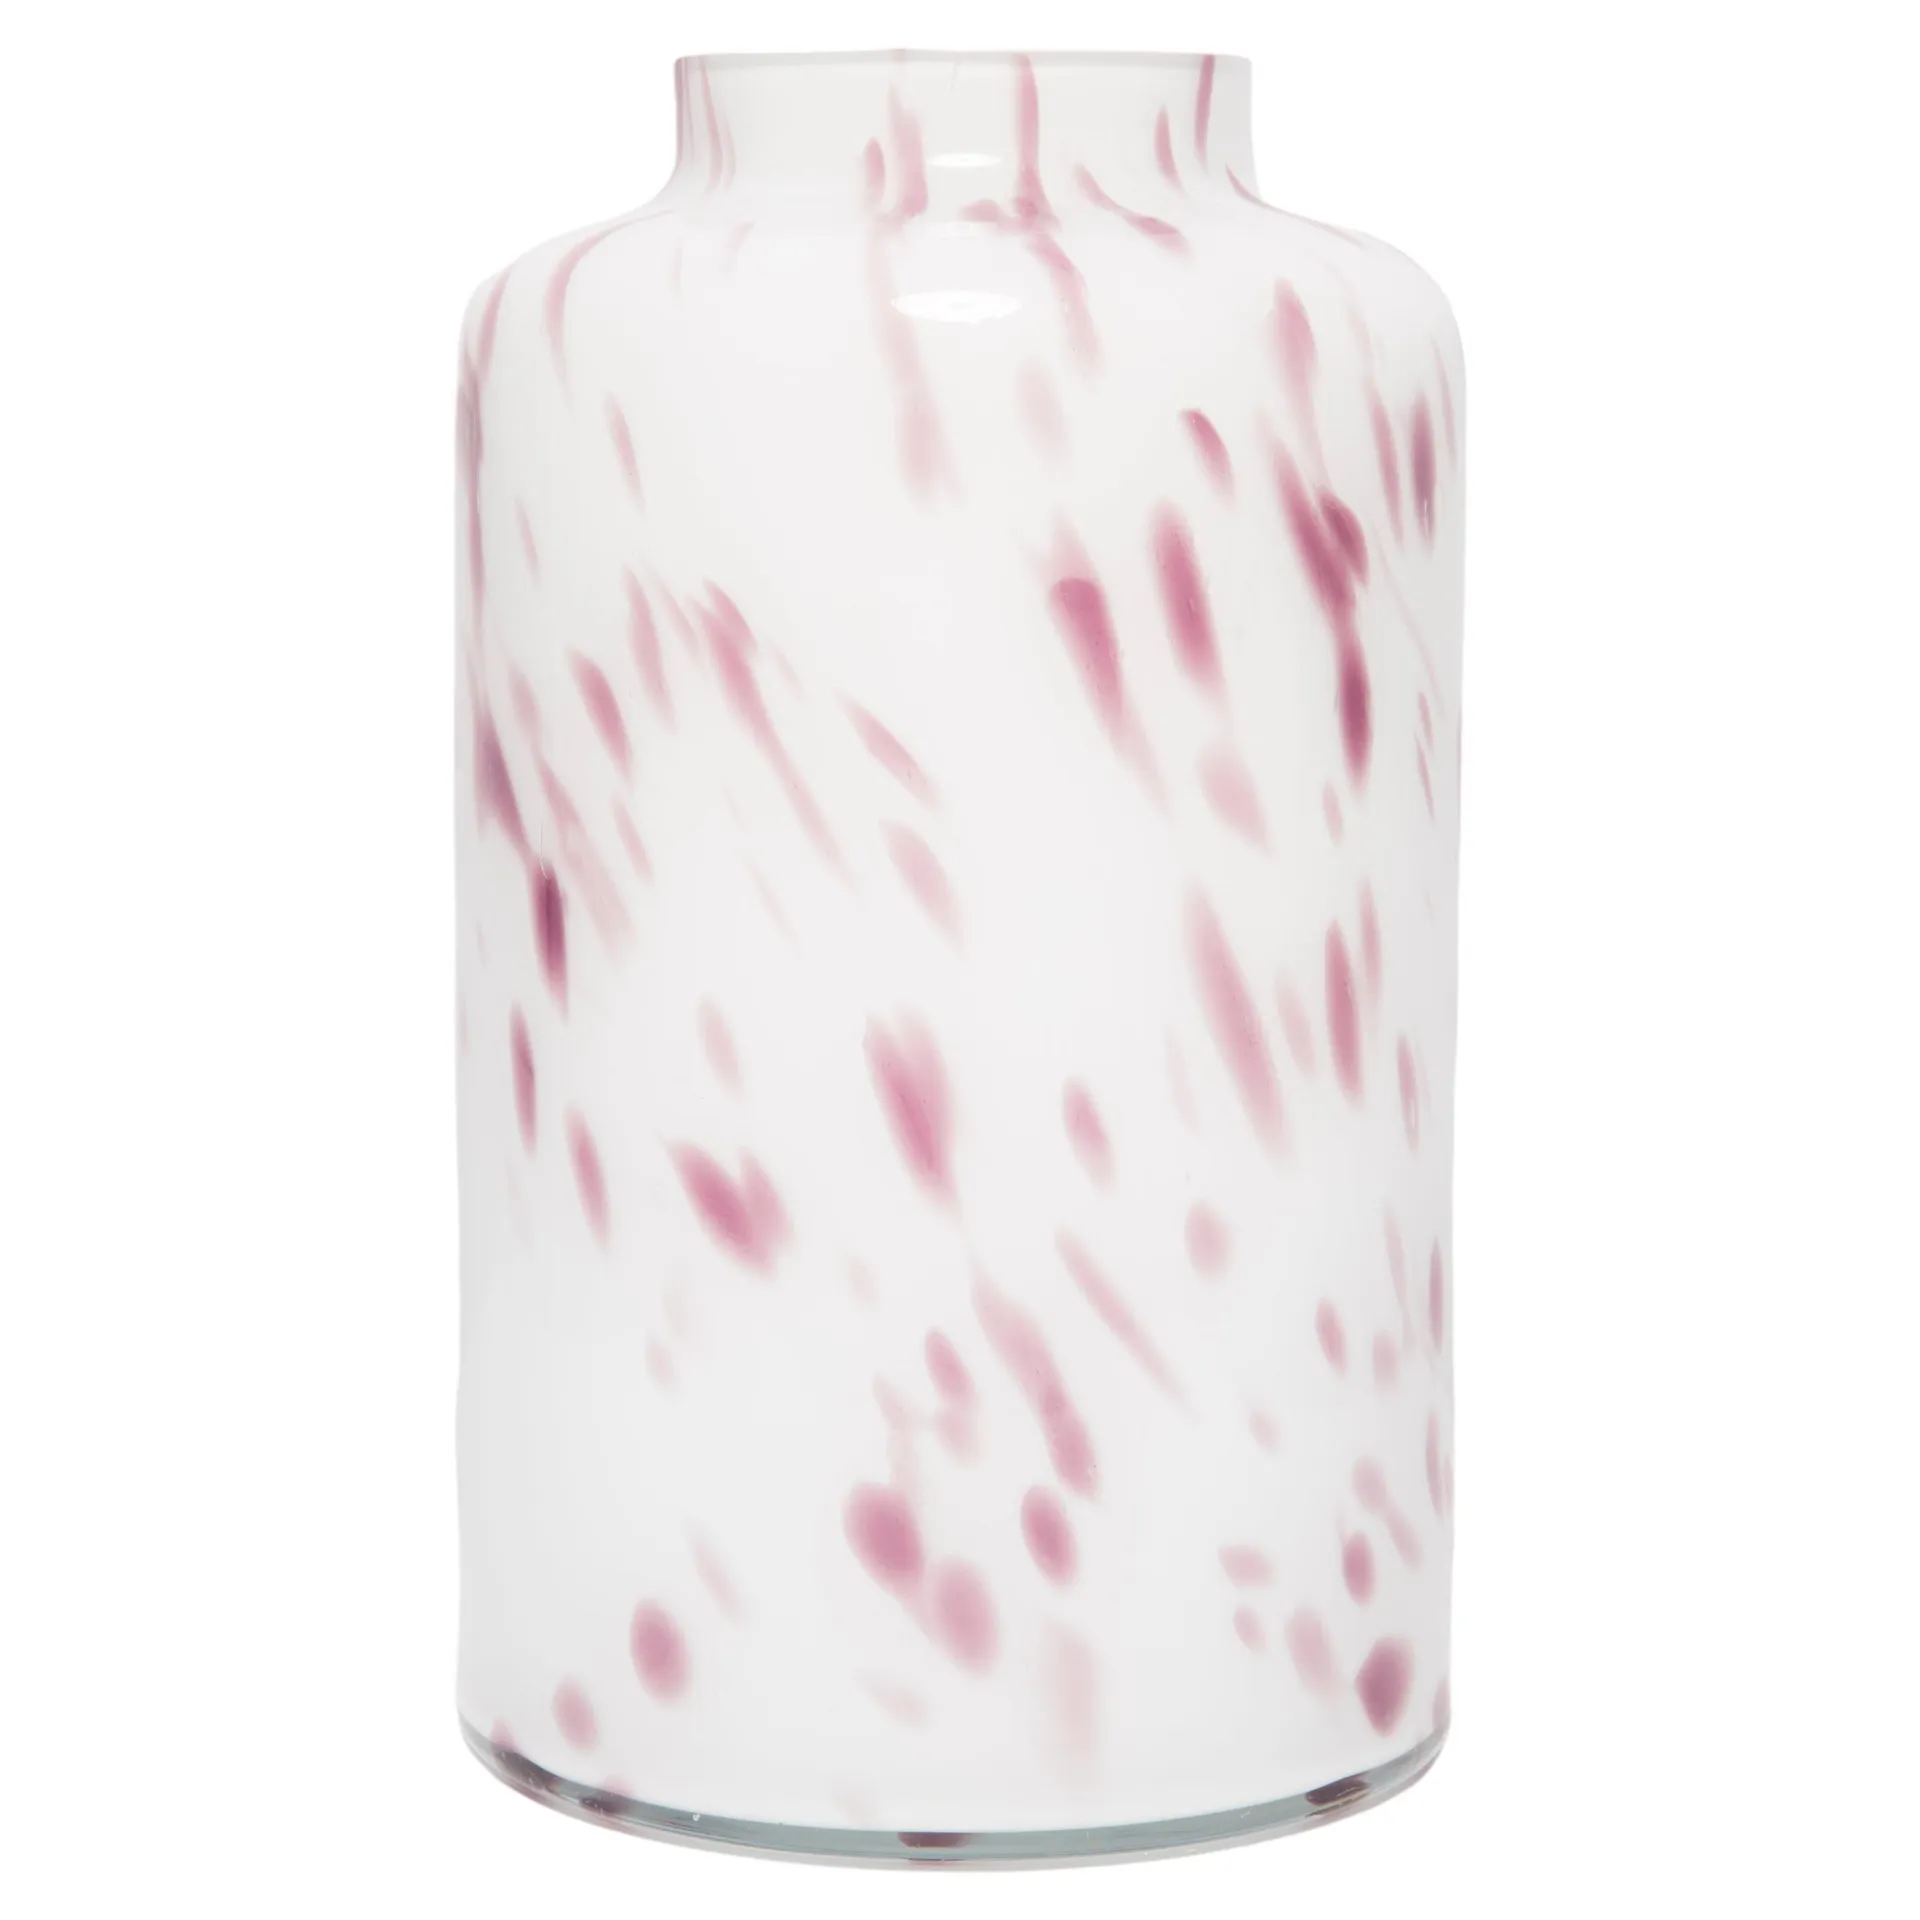 Mid Century Vintage Dalmatian White and Violet Murano Glass Vase, Italy, 2000s